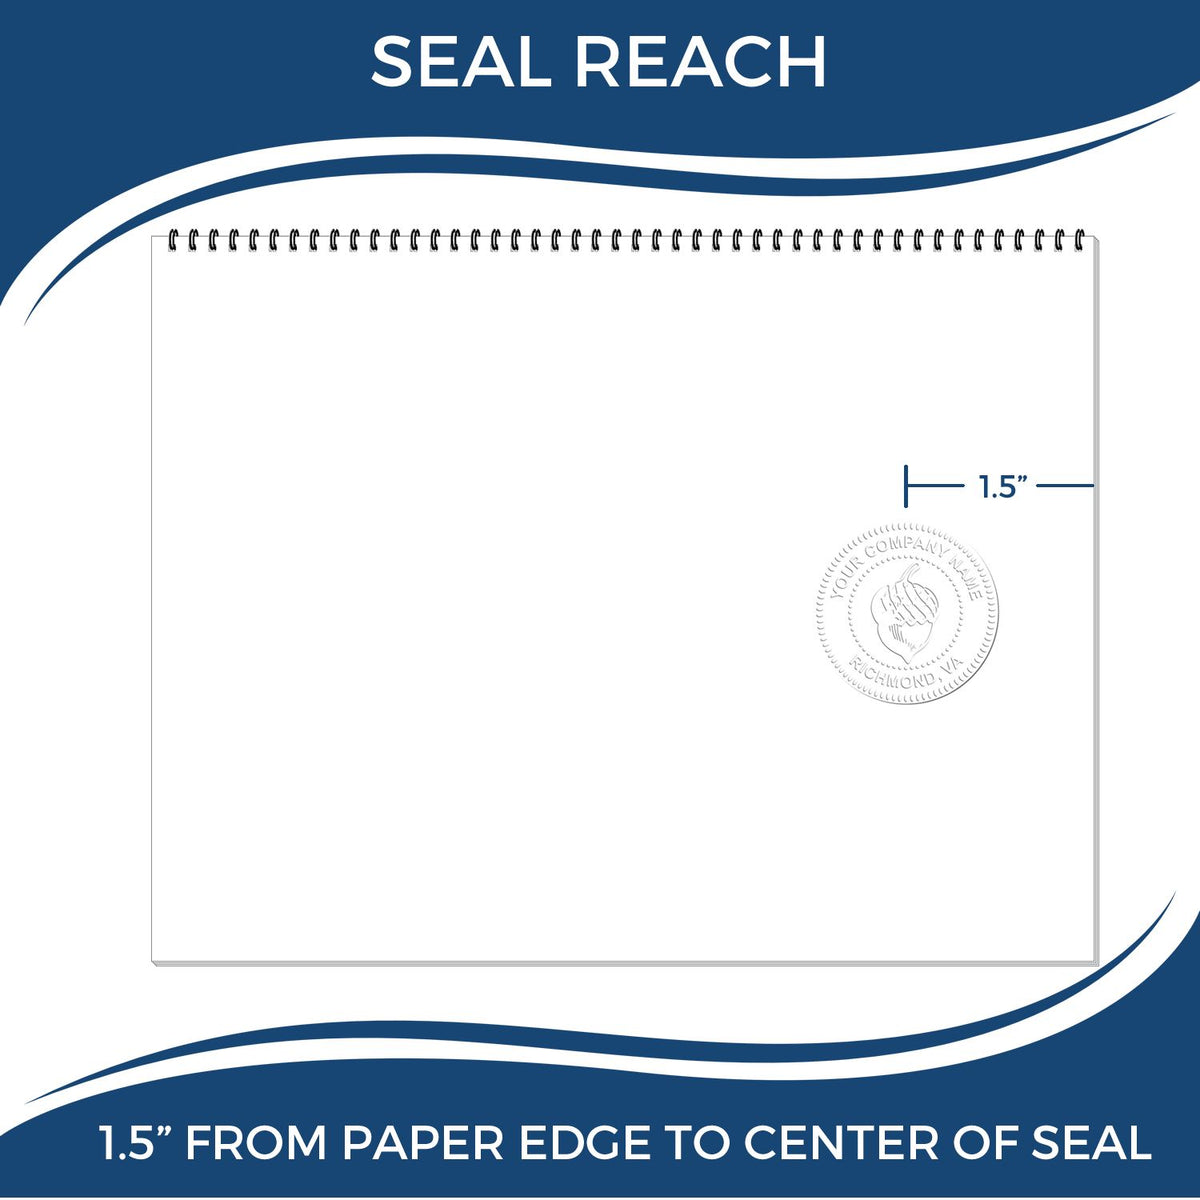 An infographic showing the seal reach which is represented by a ruler and a miniature seal image of the State of Alaska Architectural Seal Embosser